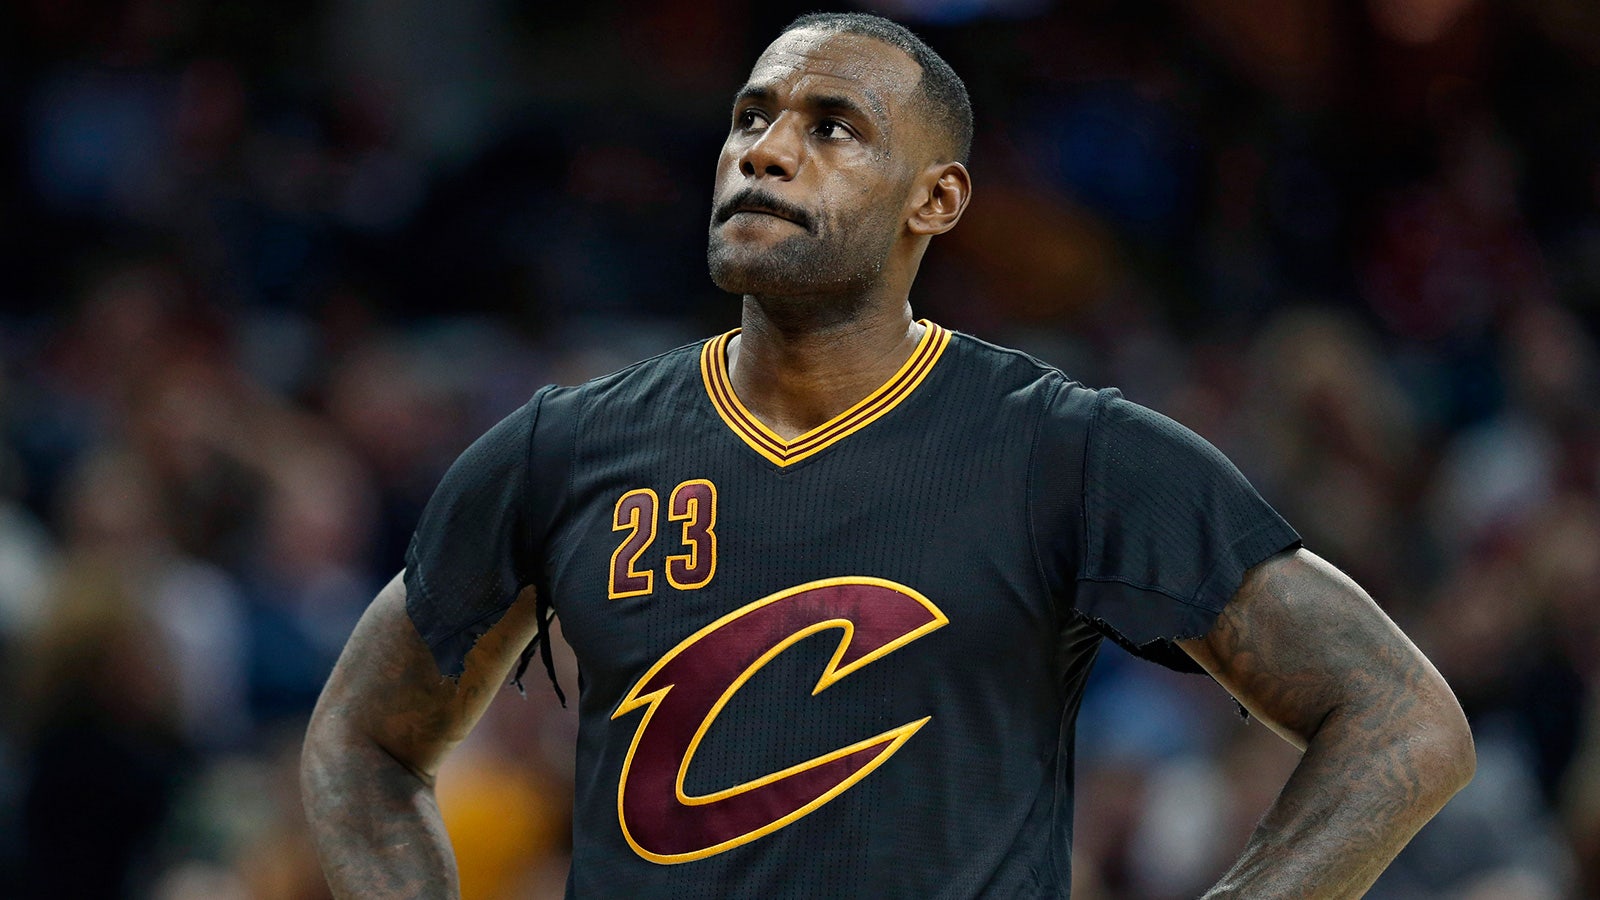 lebron black jersey with sleeves